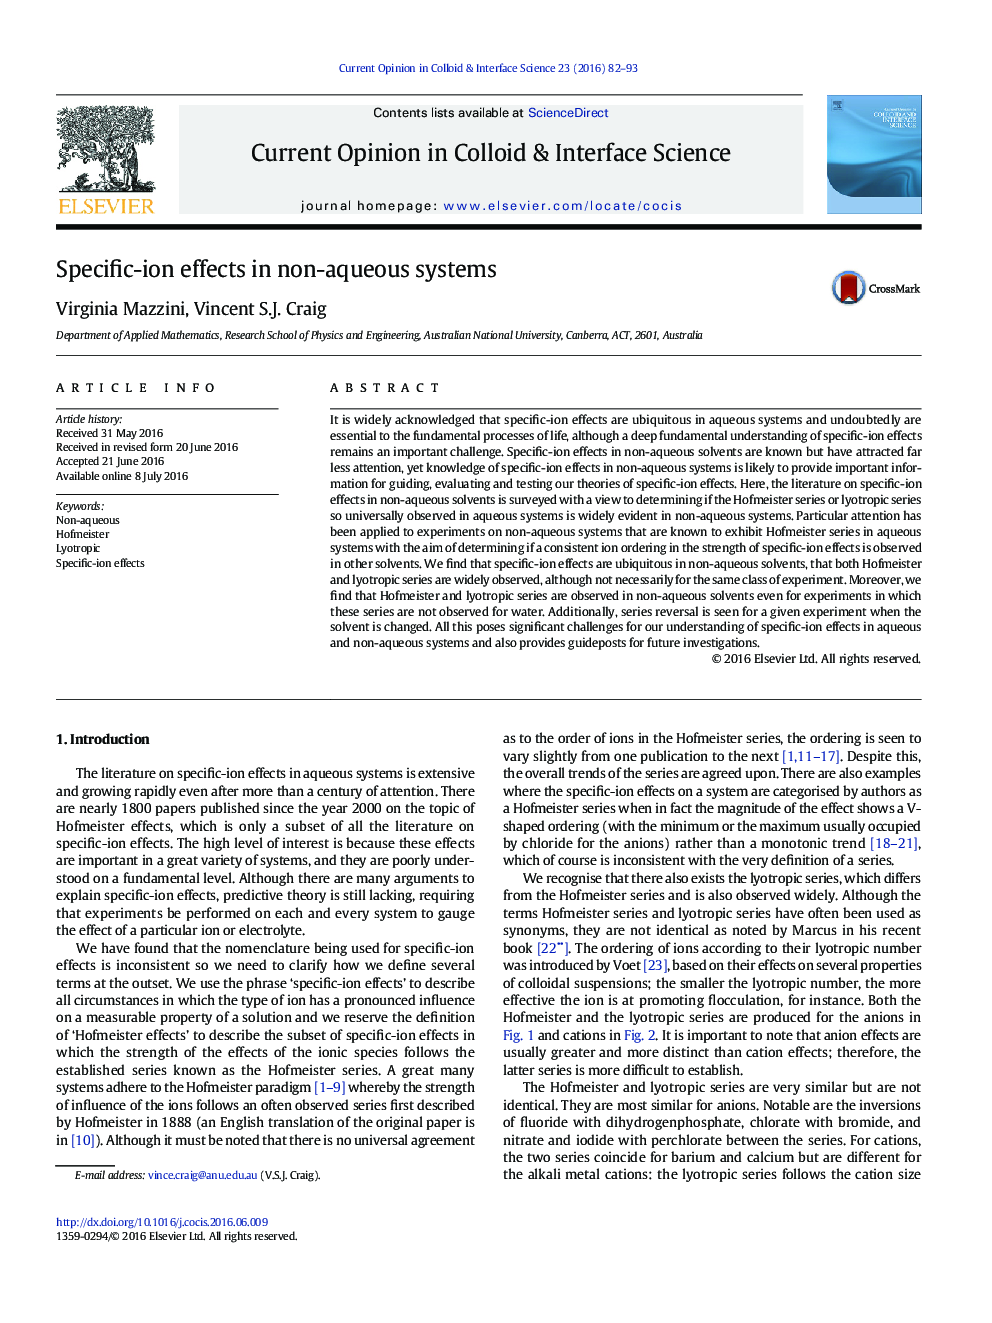 Specific-ion effects in non-aqueous systems